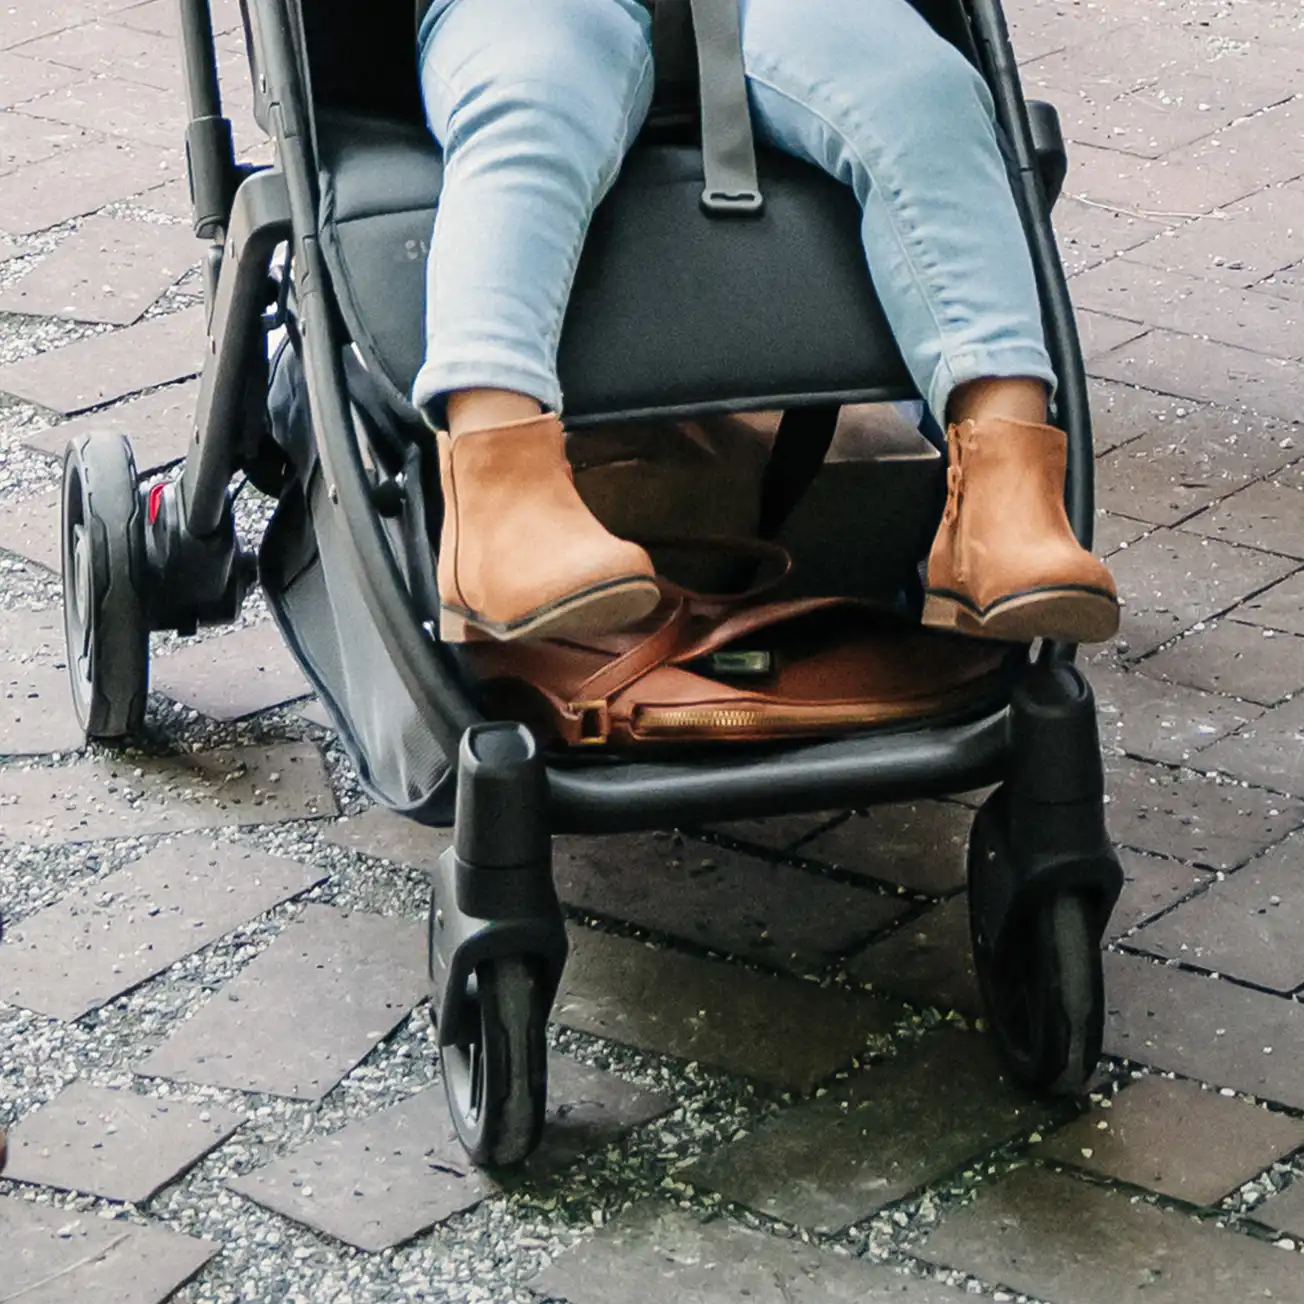 A toddler in a Minu V2 strolls through a brick city sidewalk with ease due to the stroller's front and rear spring-action suspension